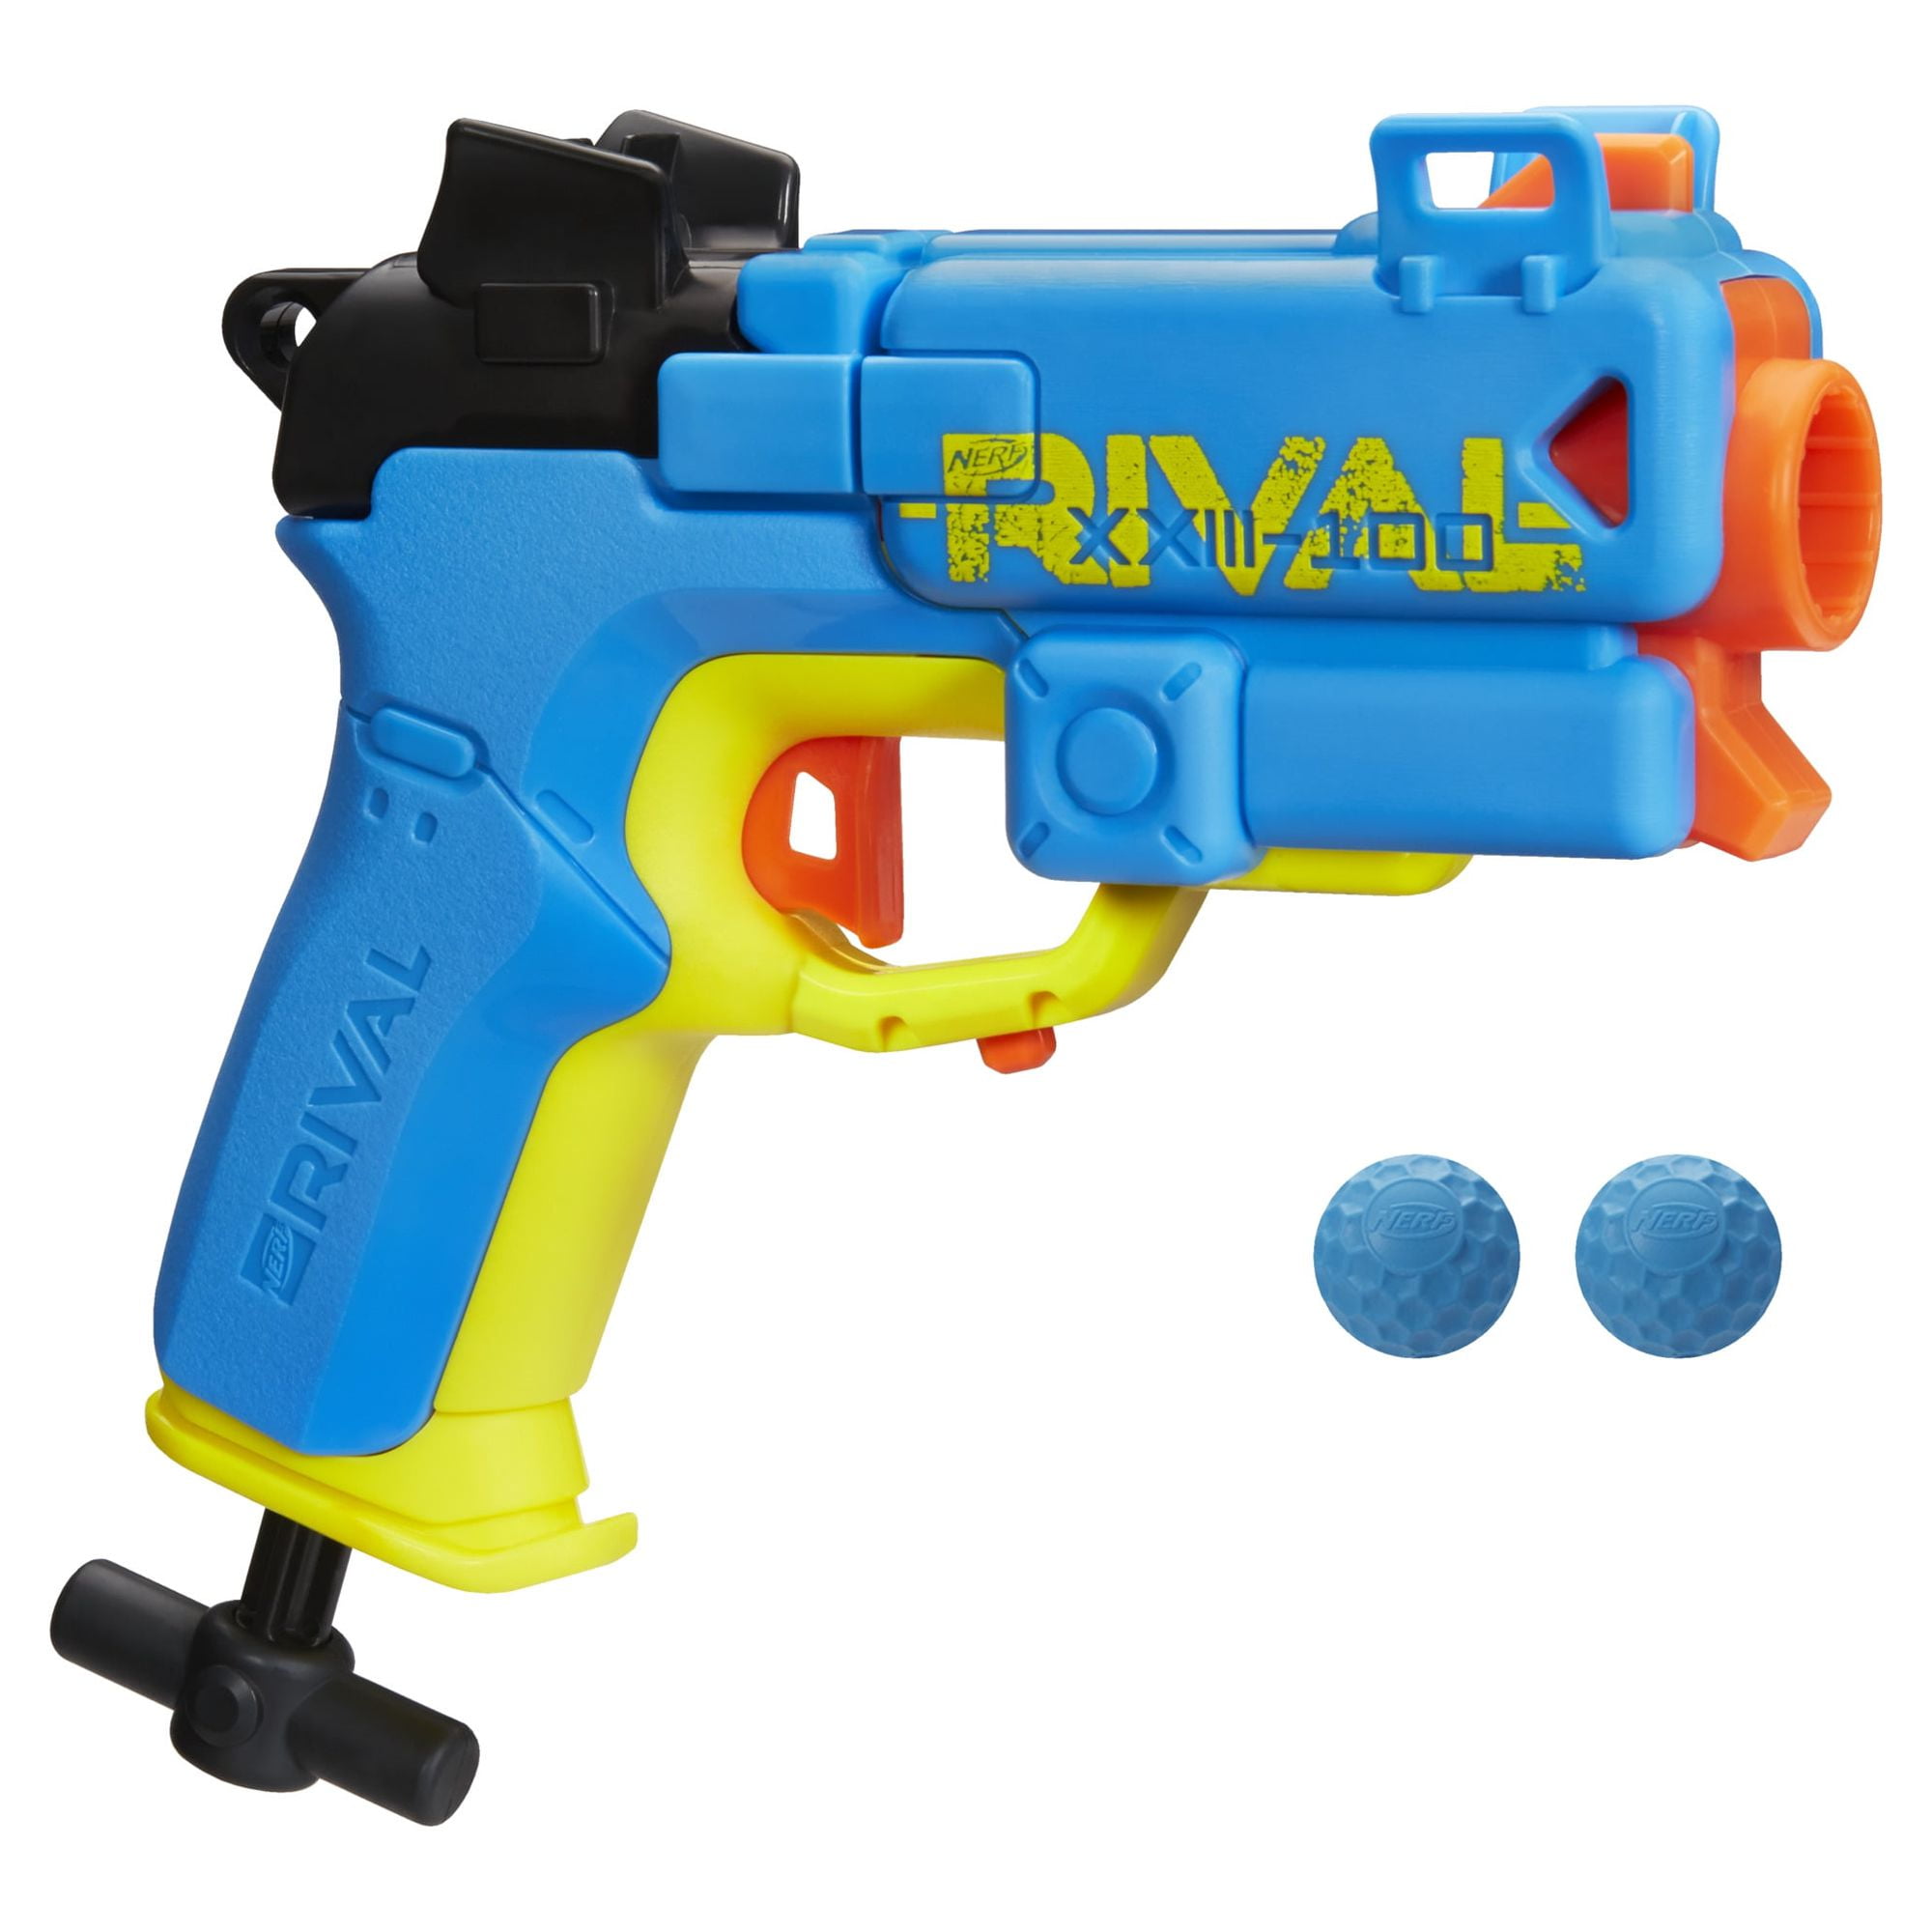 Nerf cible - Comparer 56 offres